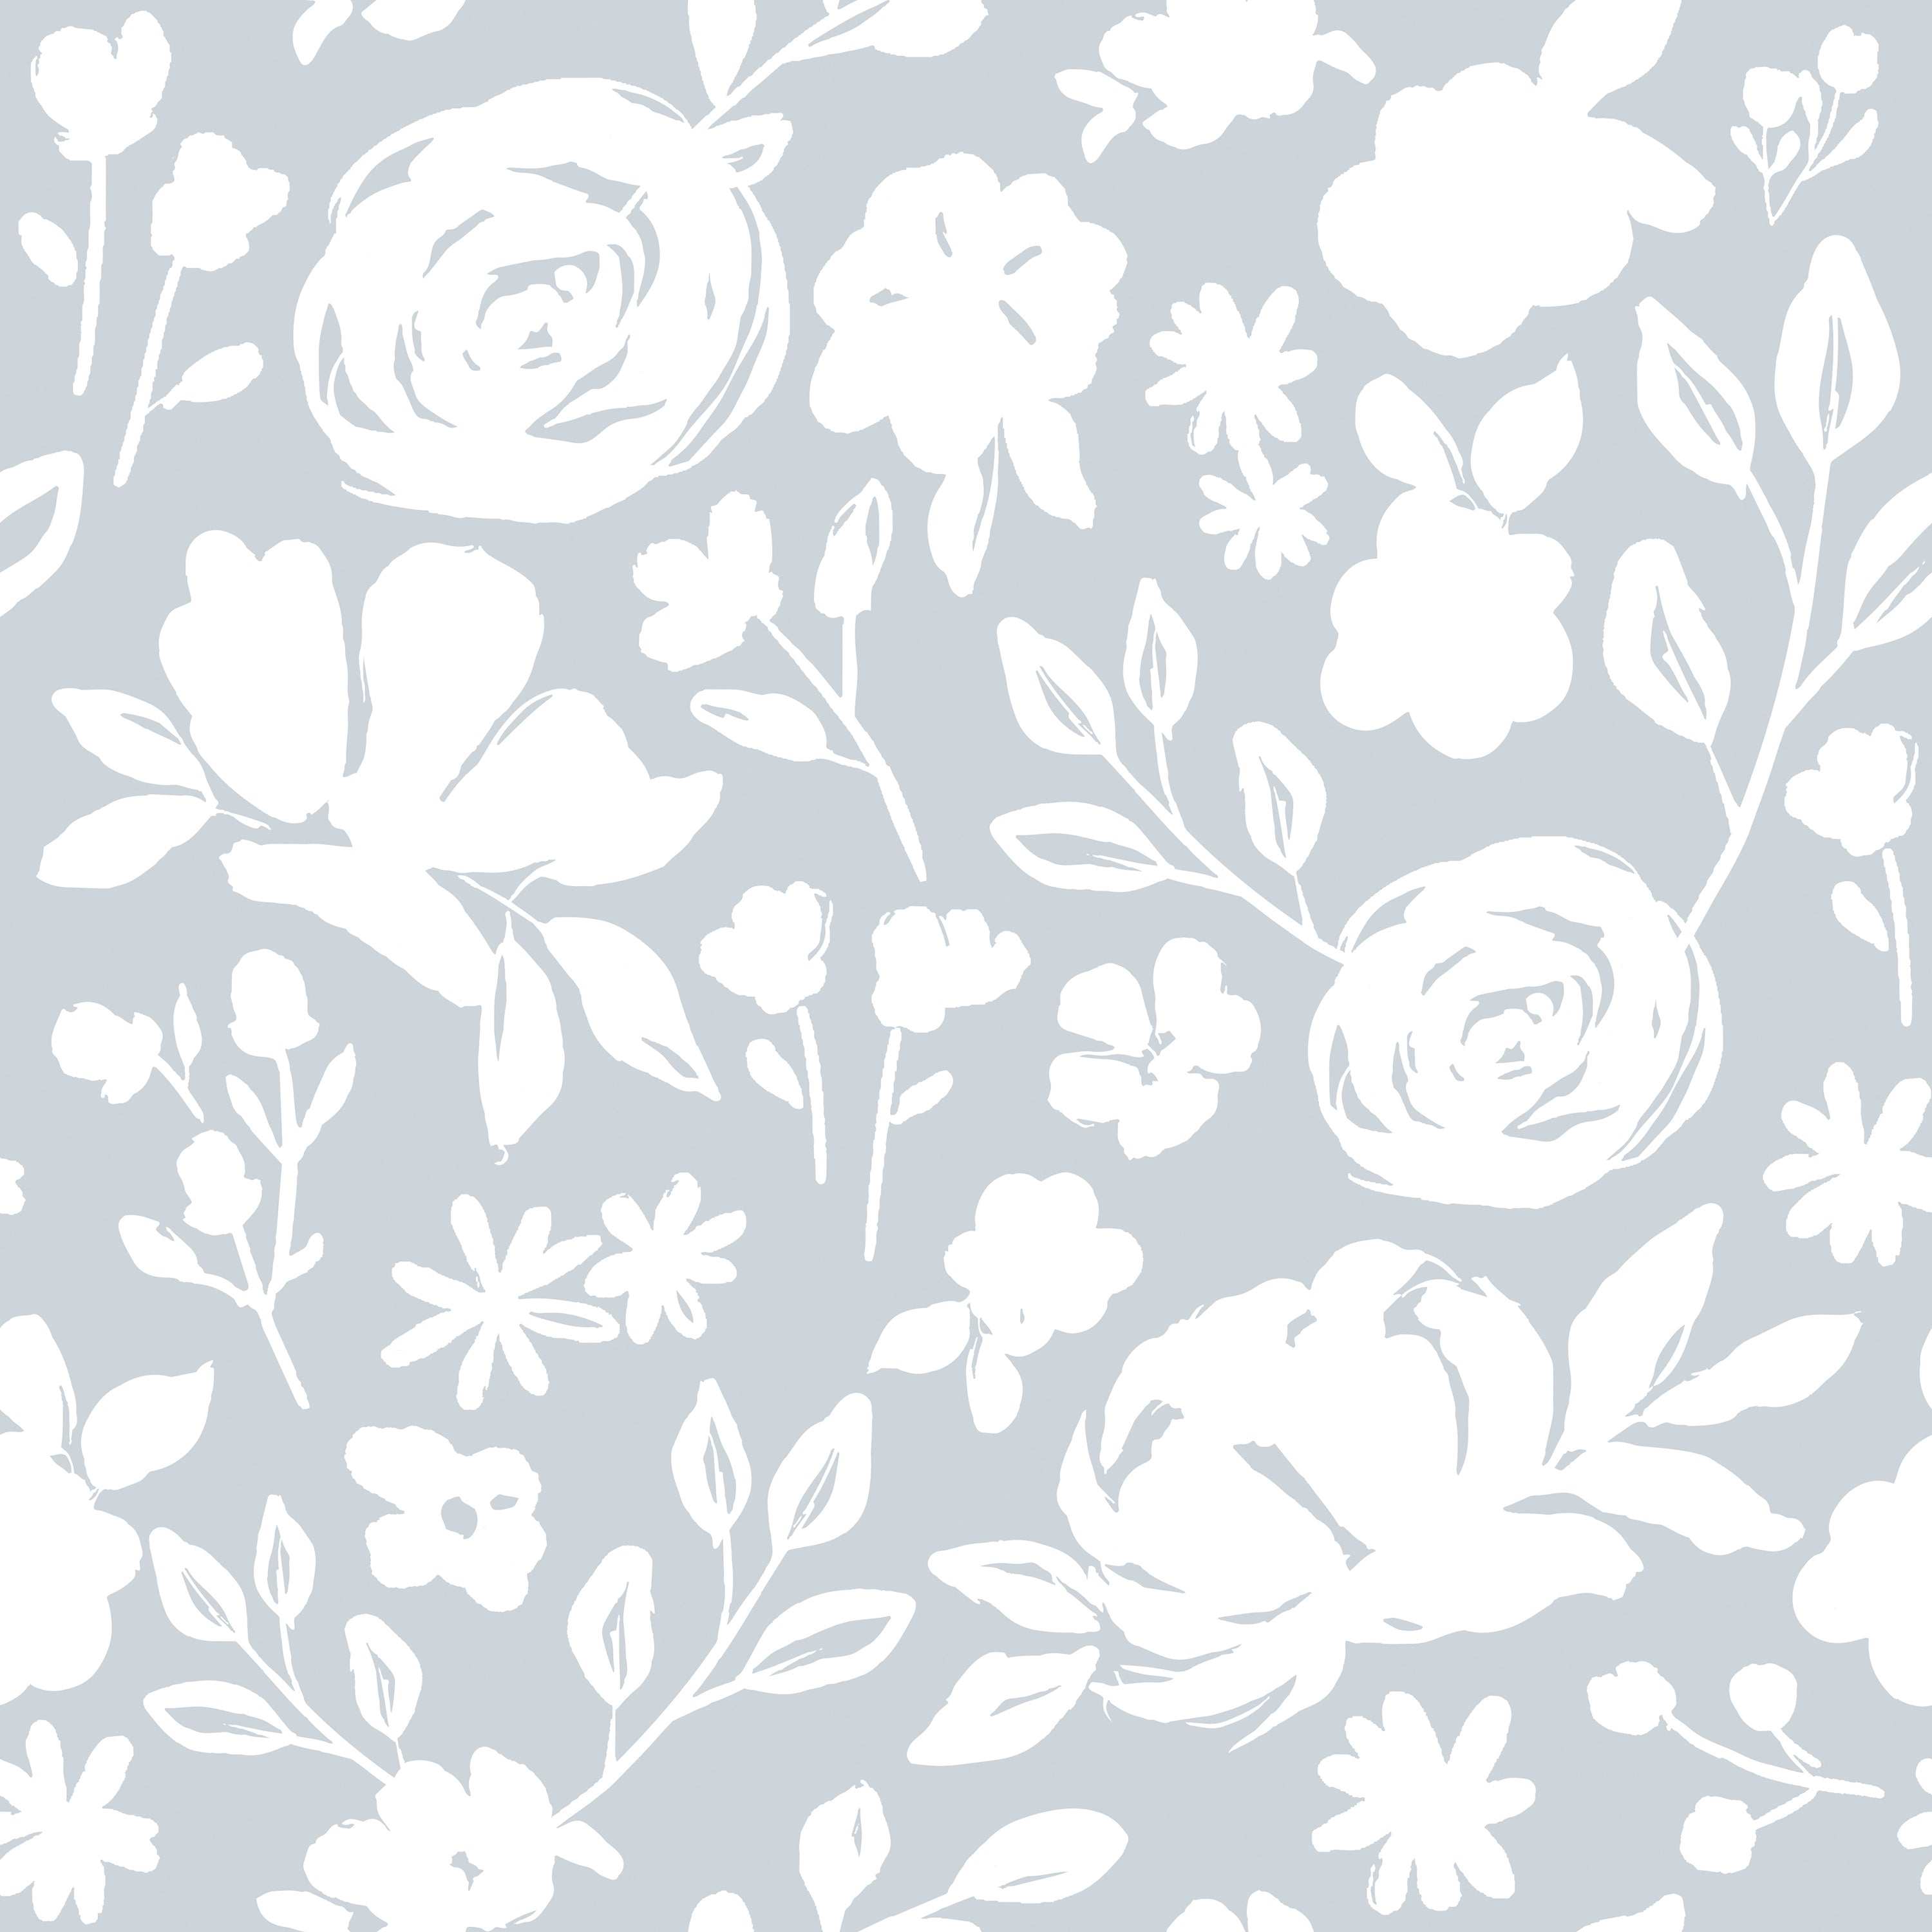 Seamless pattern of pale blue floral silhouettes on a clean white background. The design features stylized roses, blossoms, and foliage in a minimalist white hue, creating a soothing and elegant aesthetic for modern decor.